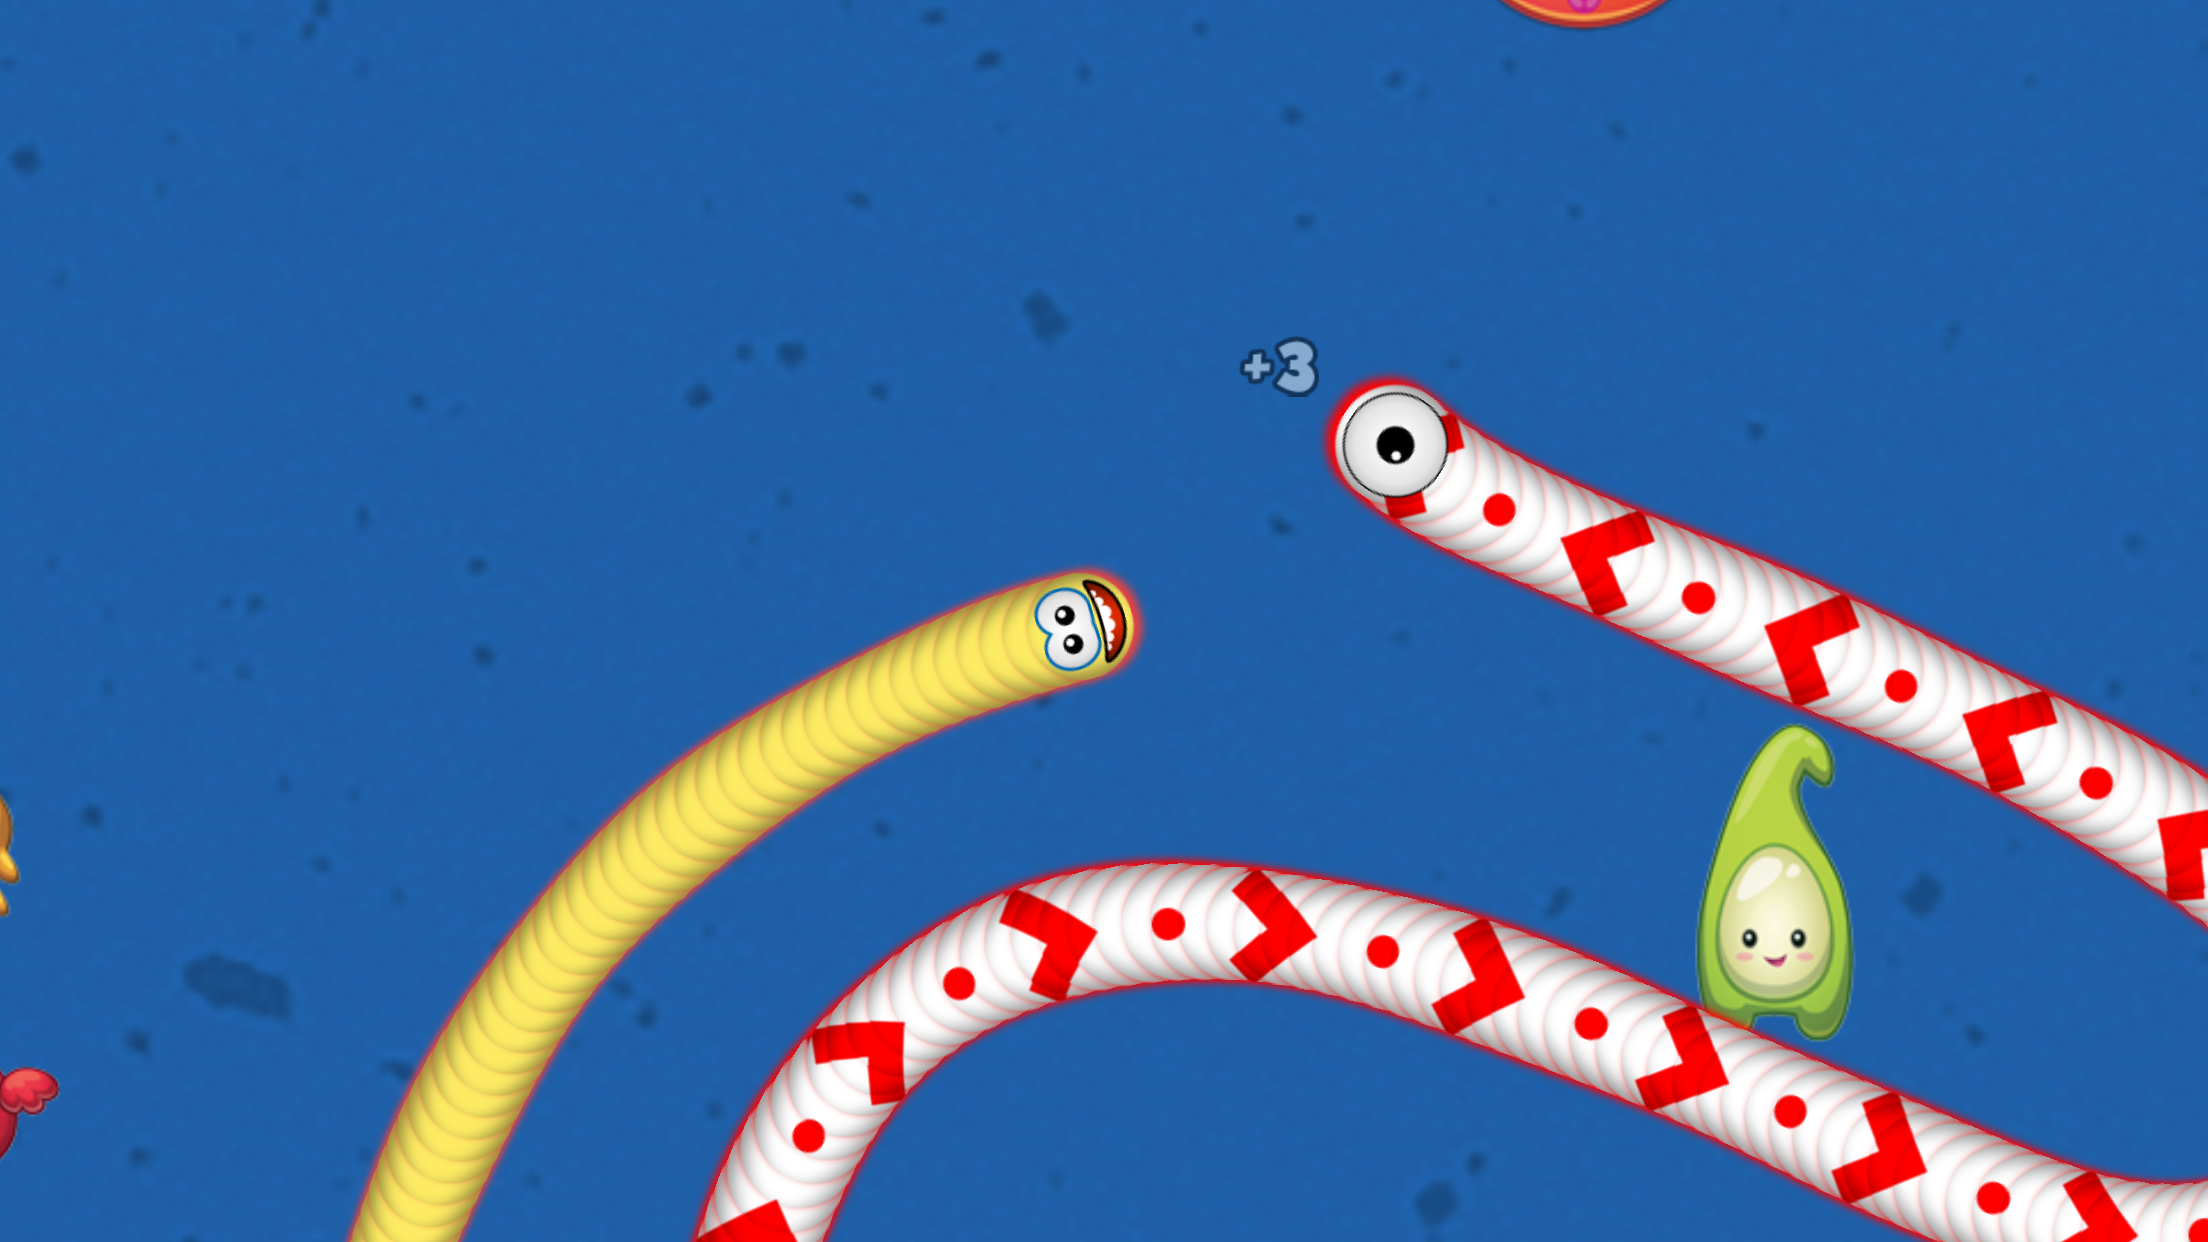 Worms Zone io Game